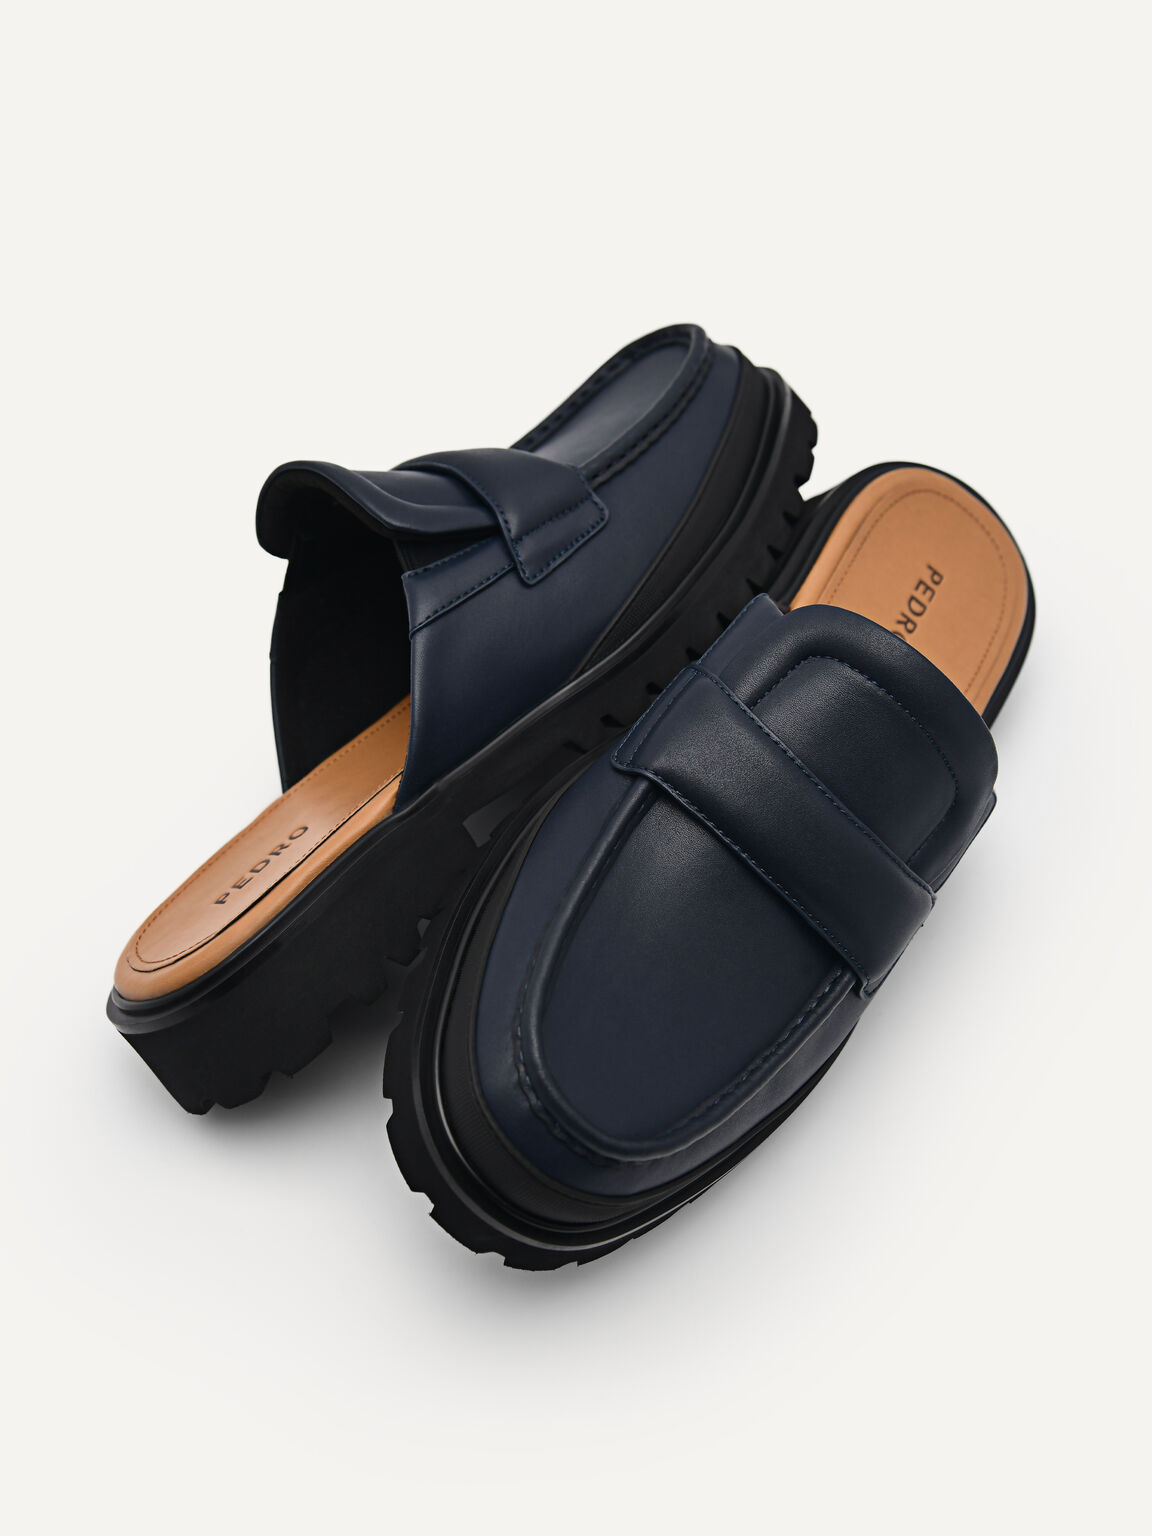 Slip-on Loafers with Chunky Outsole, Navy